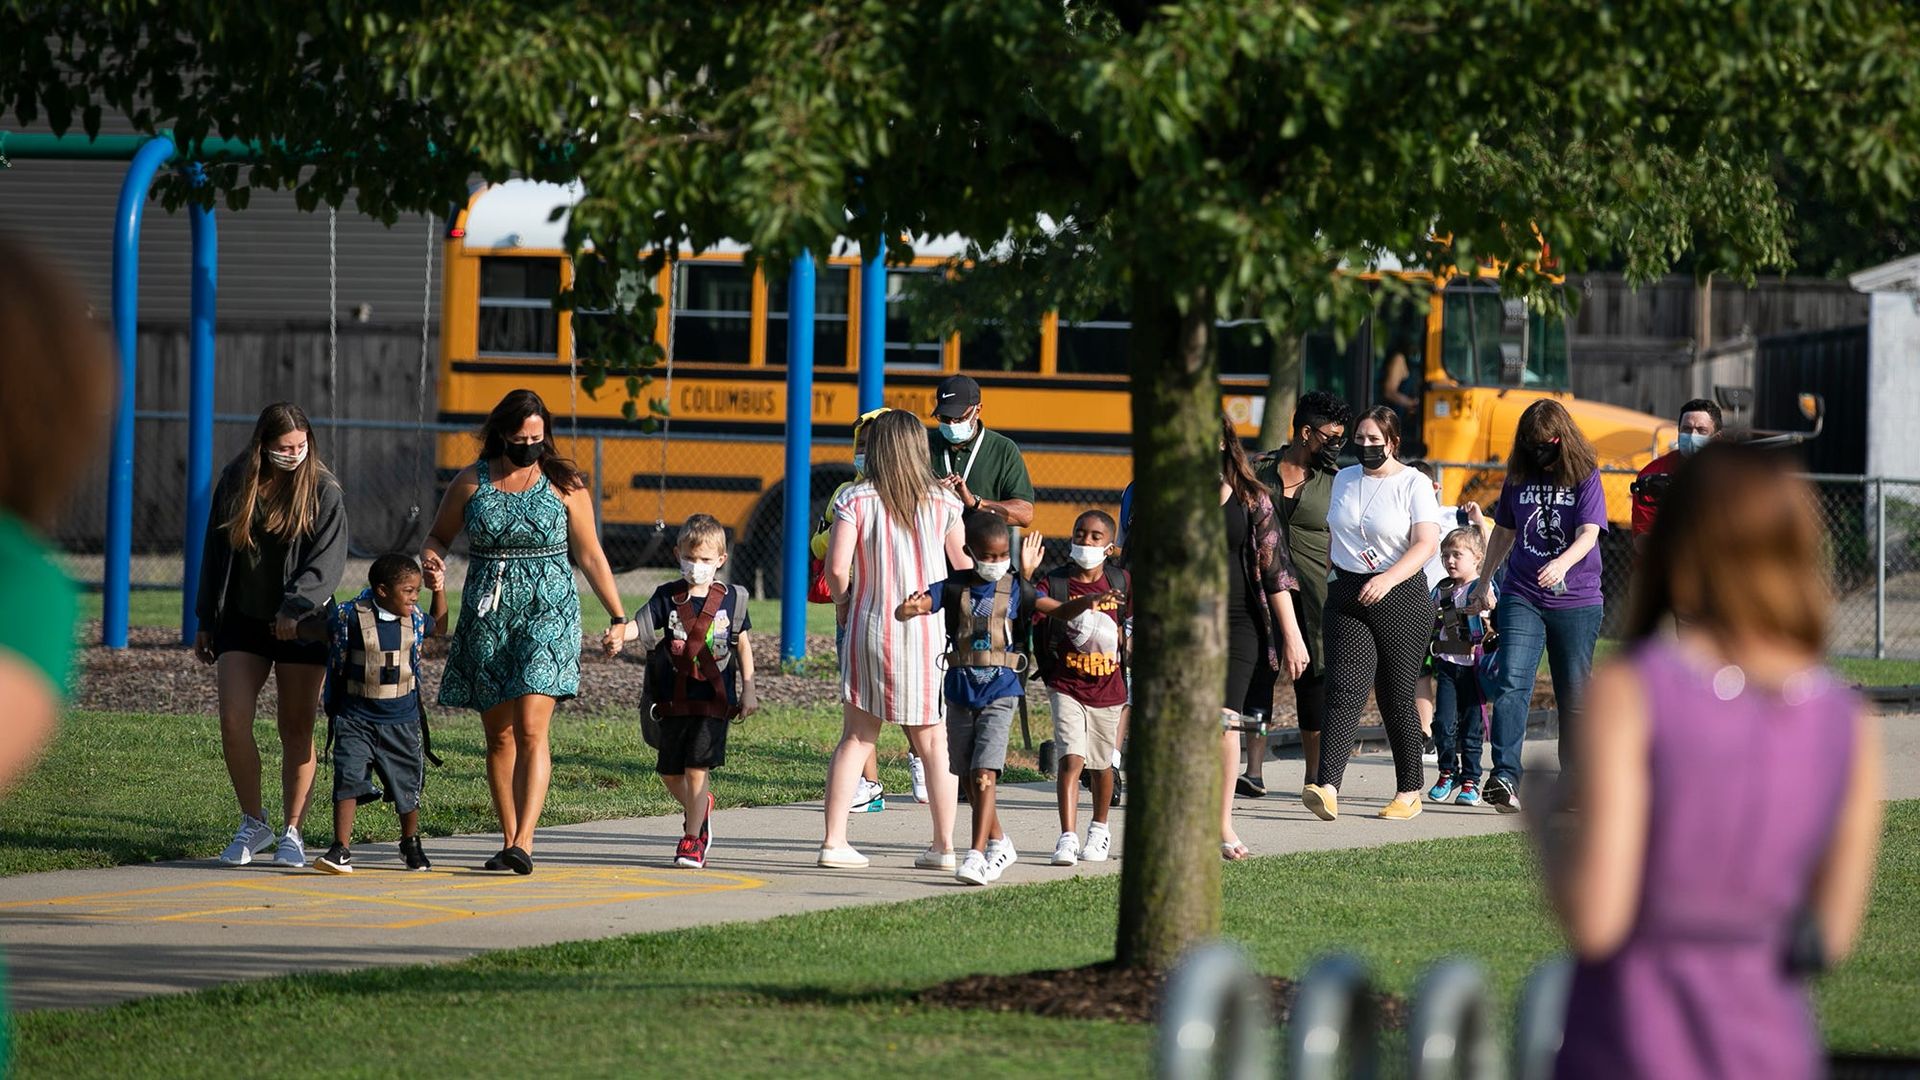 Teachers walk students from a school bus to the building.